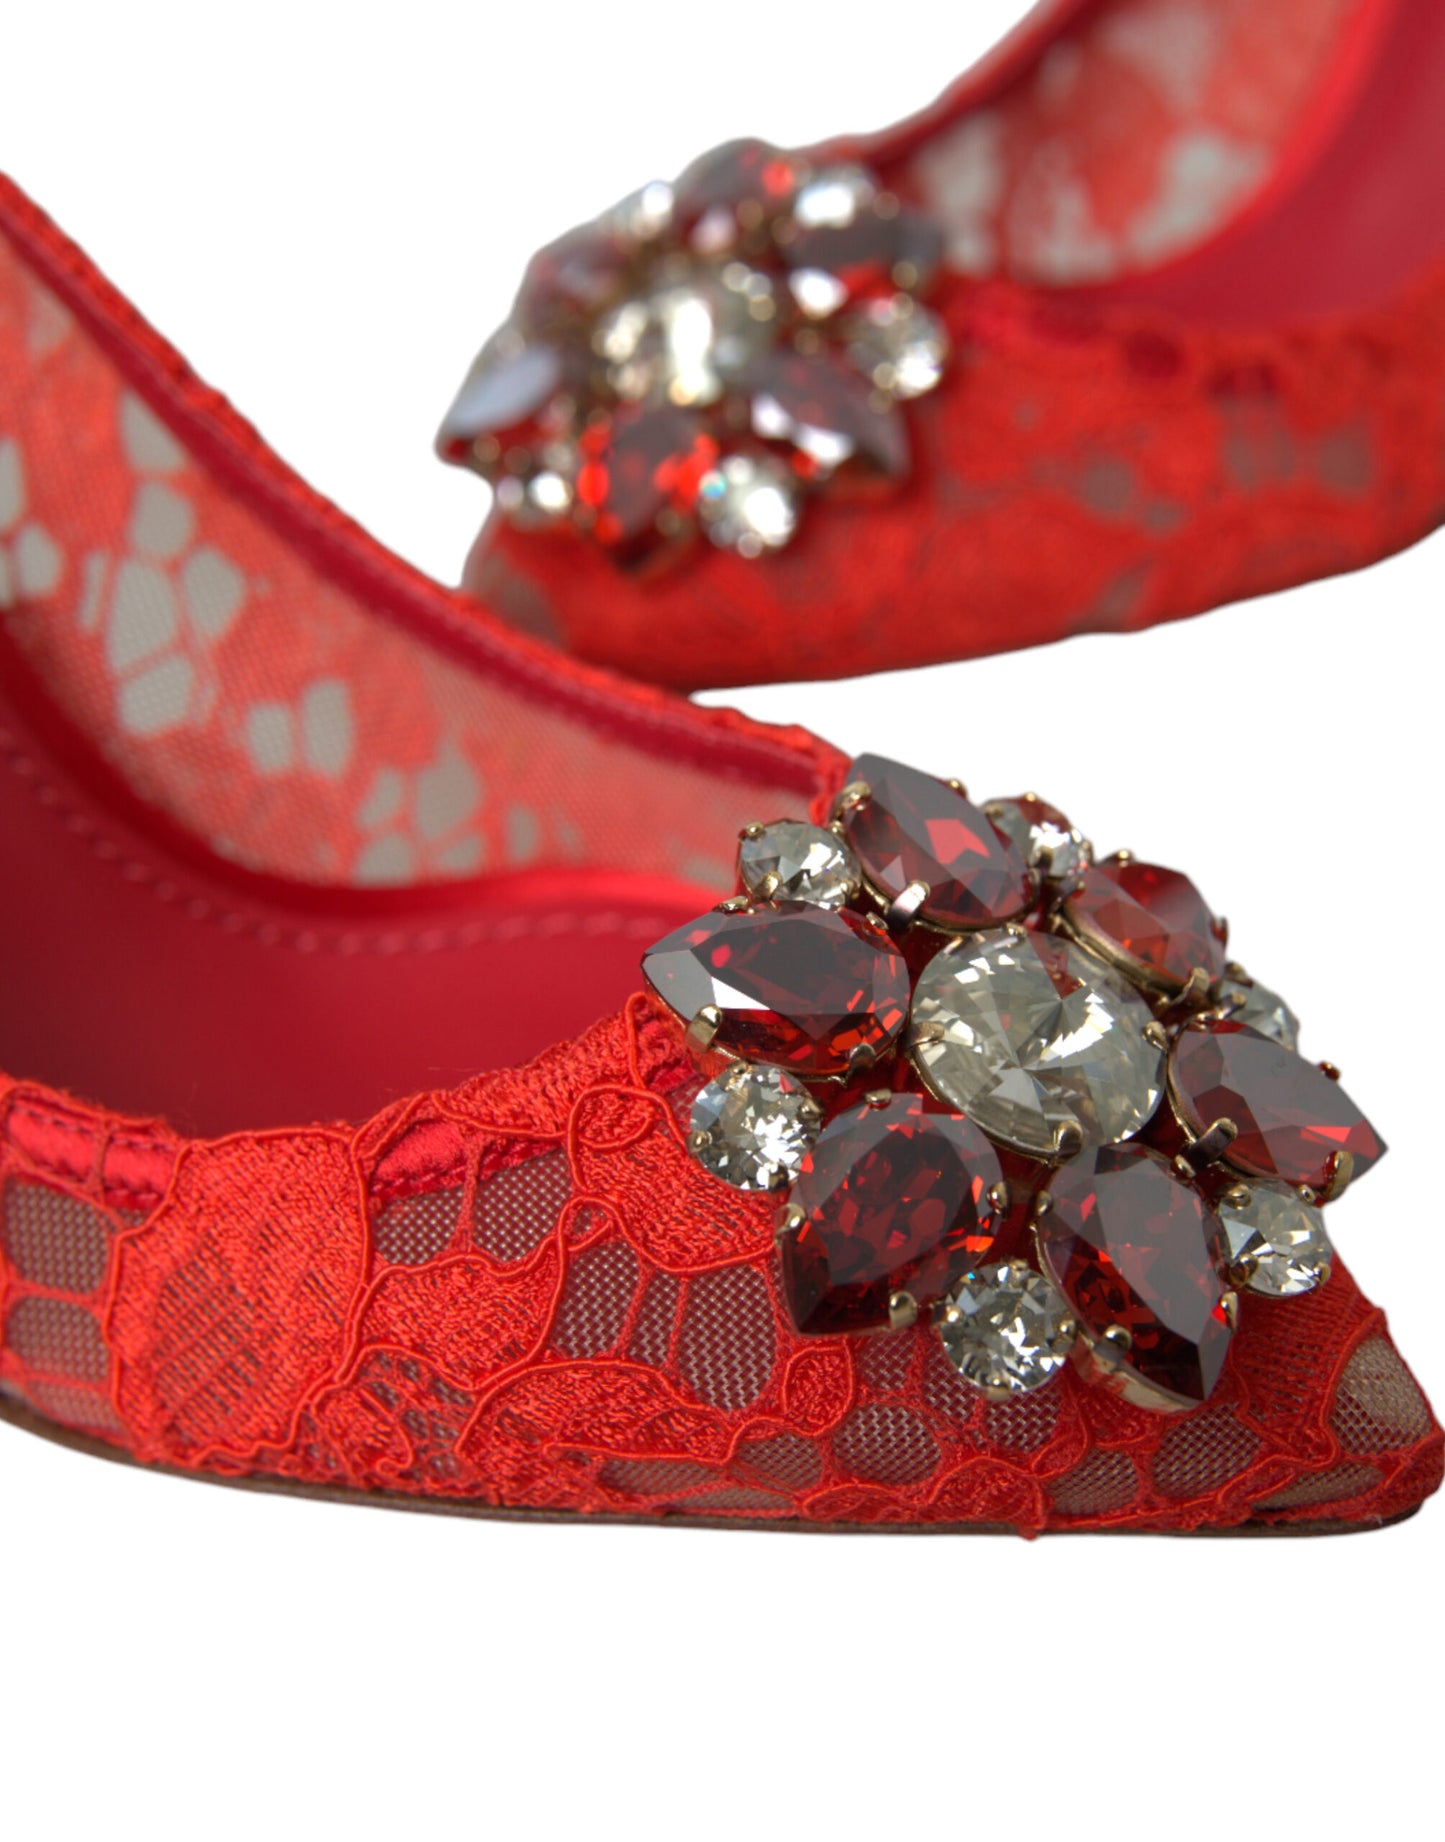 Exquisite Crystal-Embellished Red Lace Heels